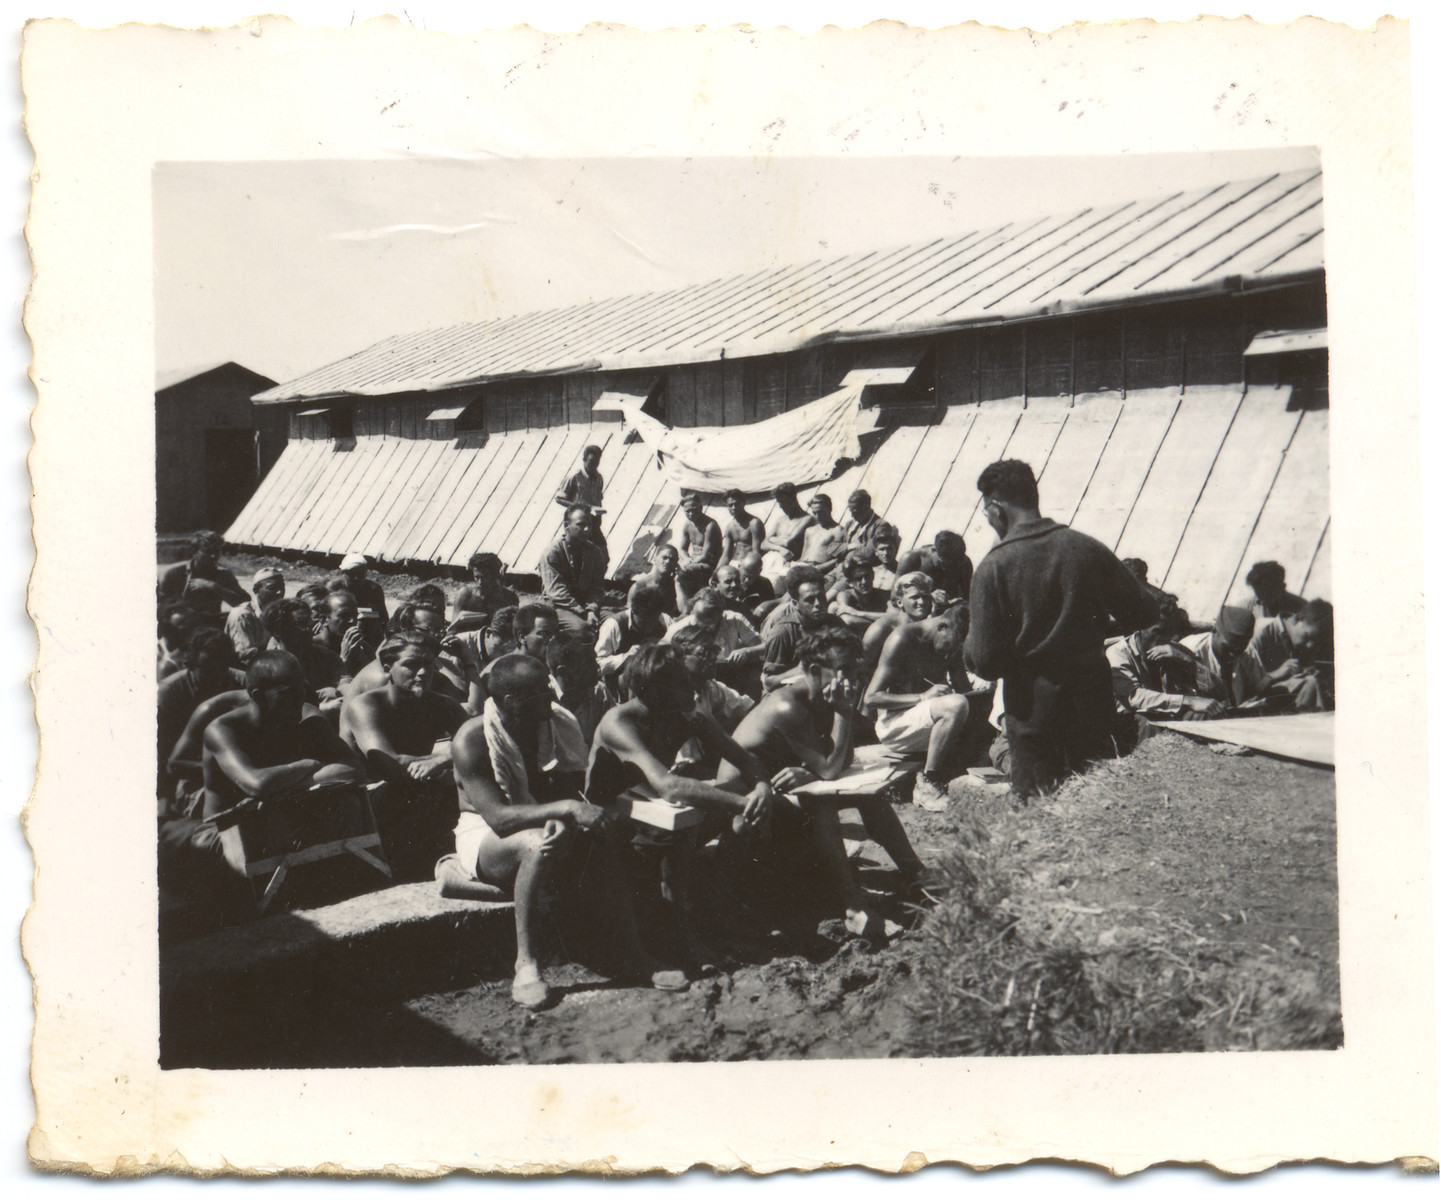 Prisoners [possibly members of the International Brigade who fought in the Spanish Civil war] listen to a speaker in the Gurs internment camp. 

The donor's father might be the man sitting on the far right and taking notes.